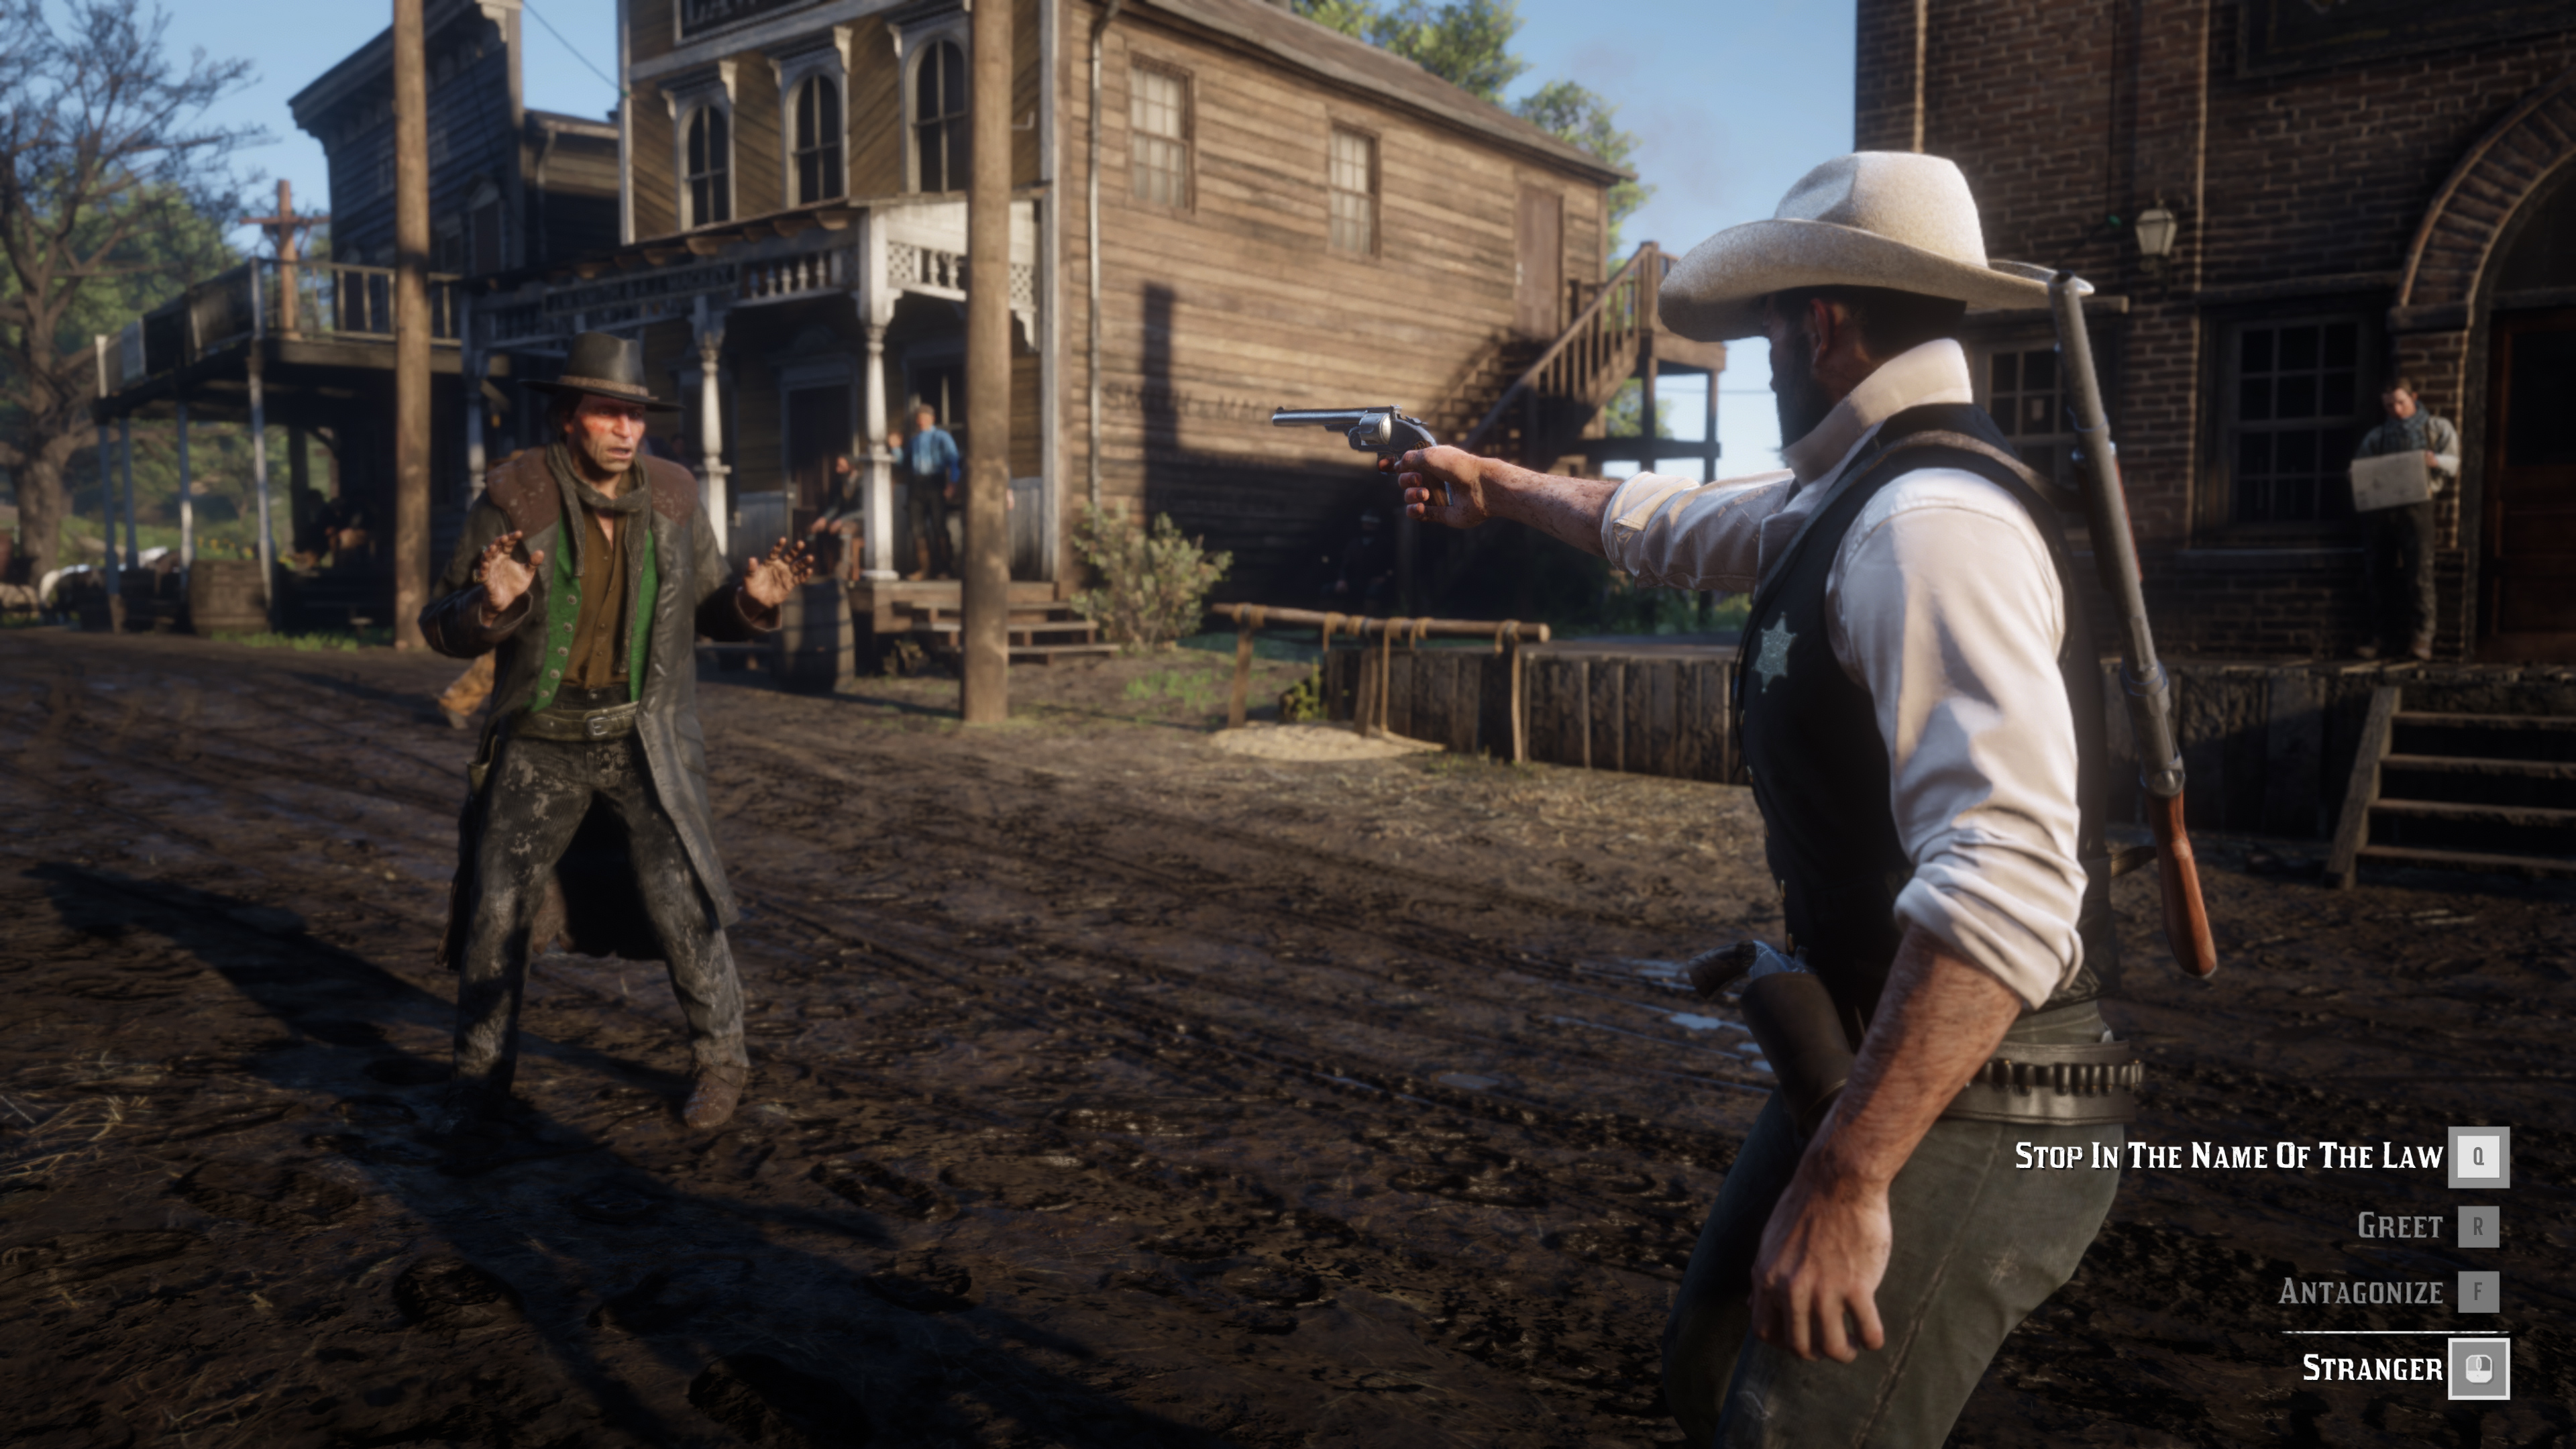 This Red Dead Redemption 2 mod will let you switch sides and become a  lawman | PC Gamer